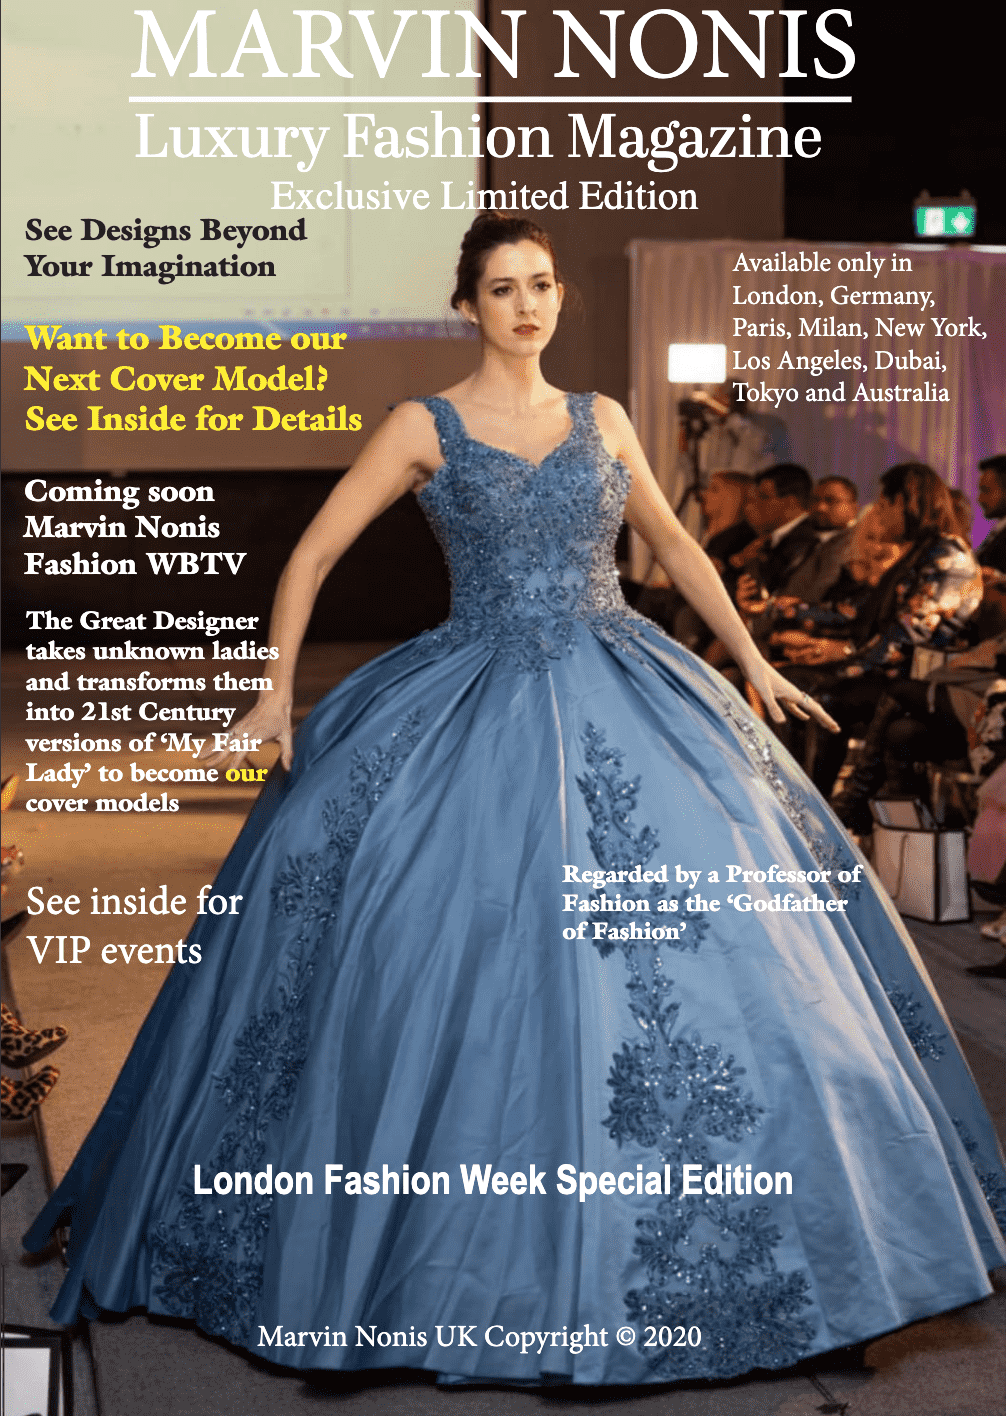 Introducing the Marvin Nonis Luxury Fashion Magazine Edition